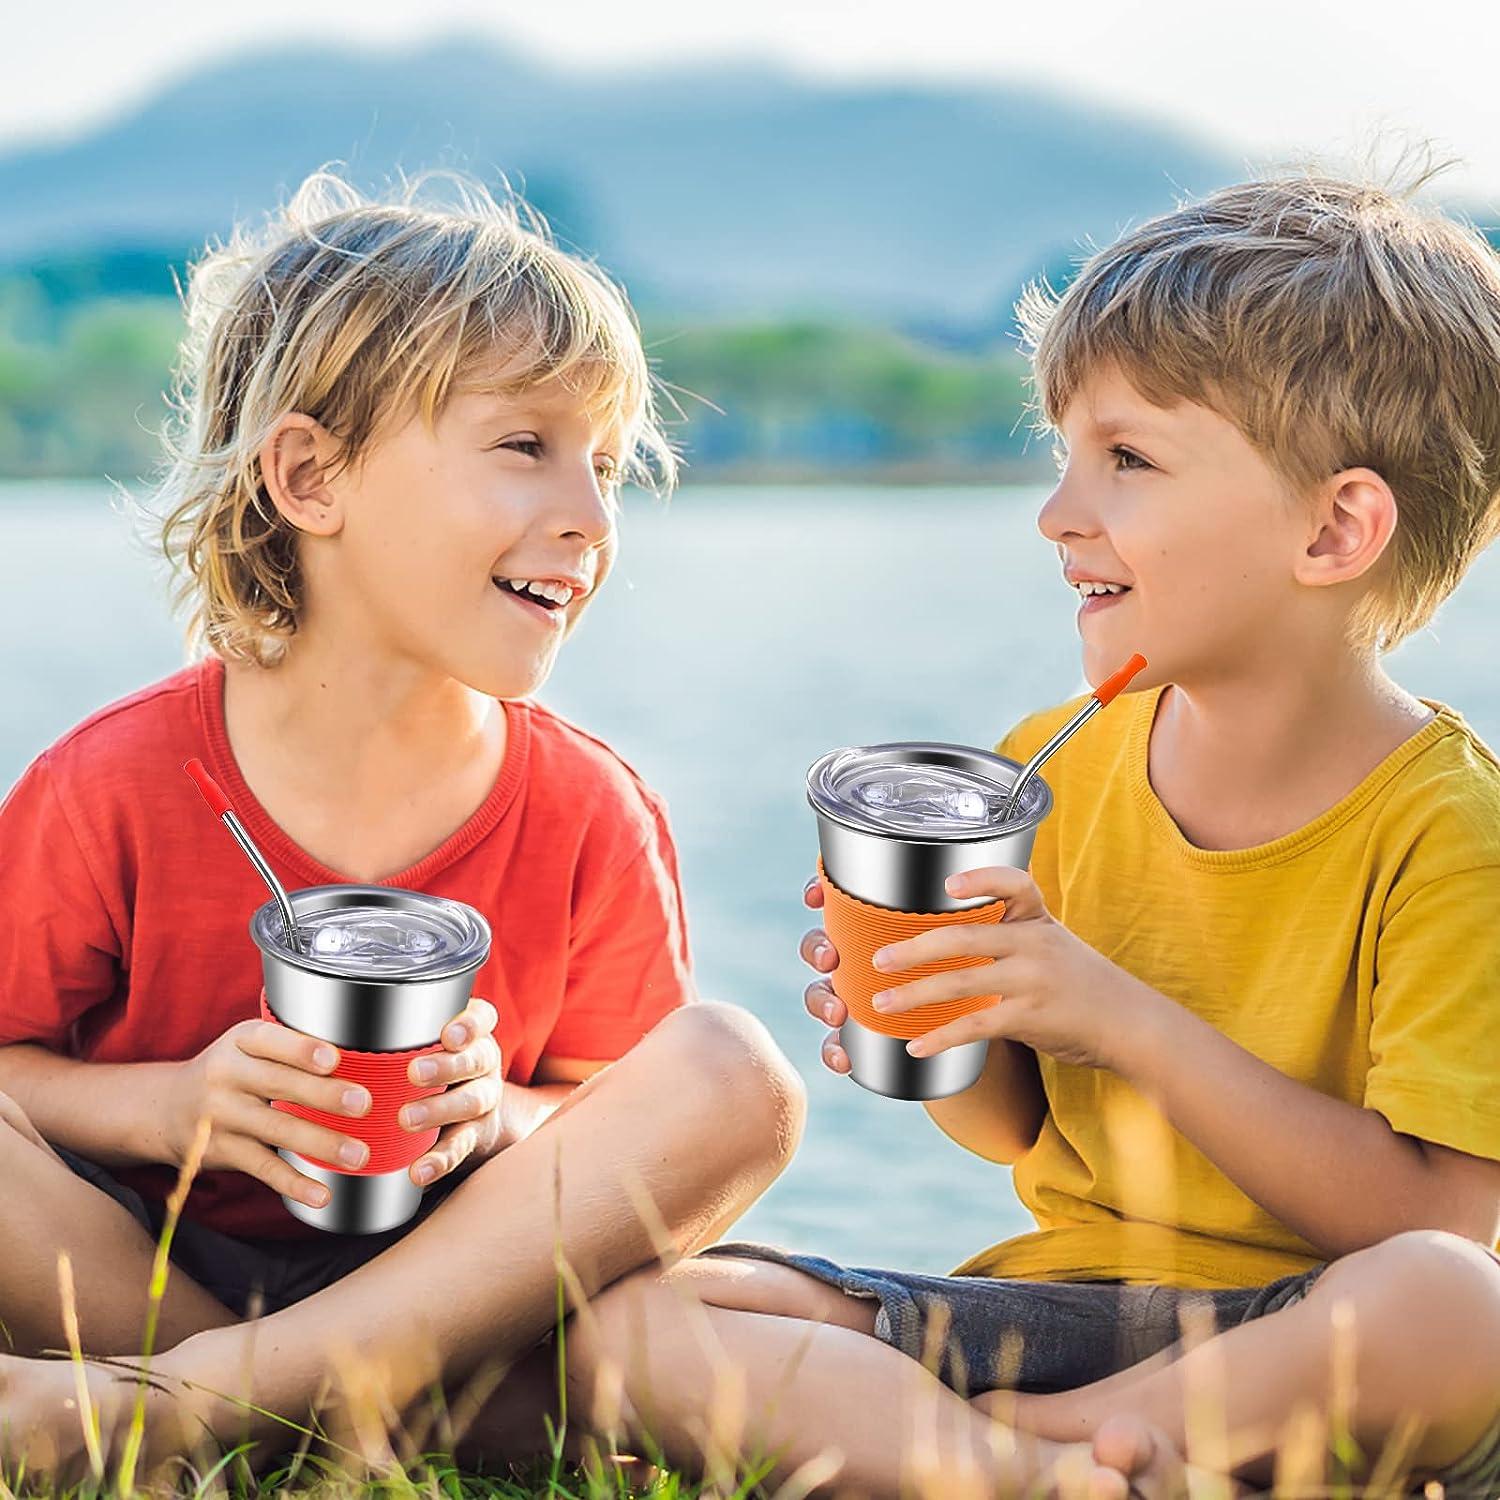 Spill Proof Cups for Kids 6 Pack 12oz Stainless Steel Kids Cups